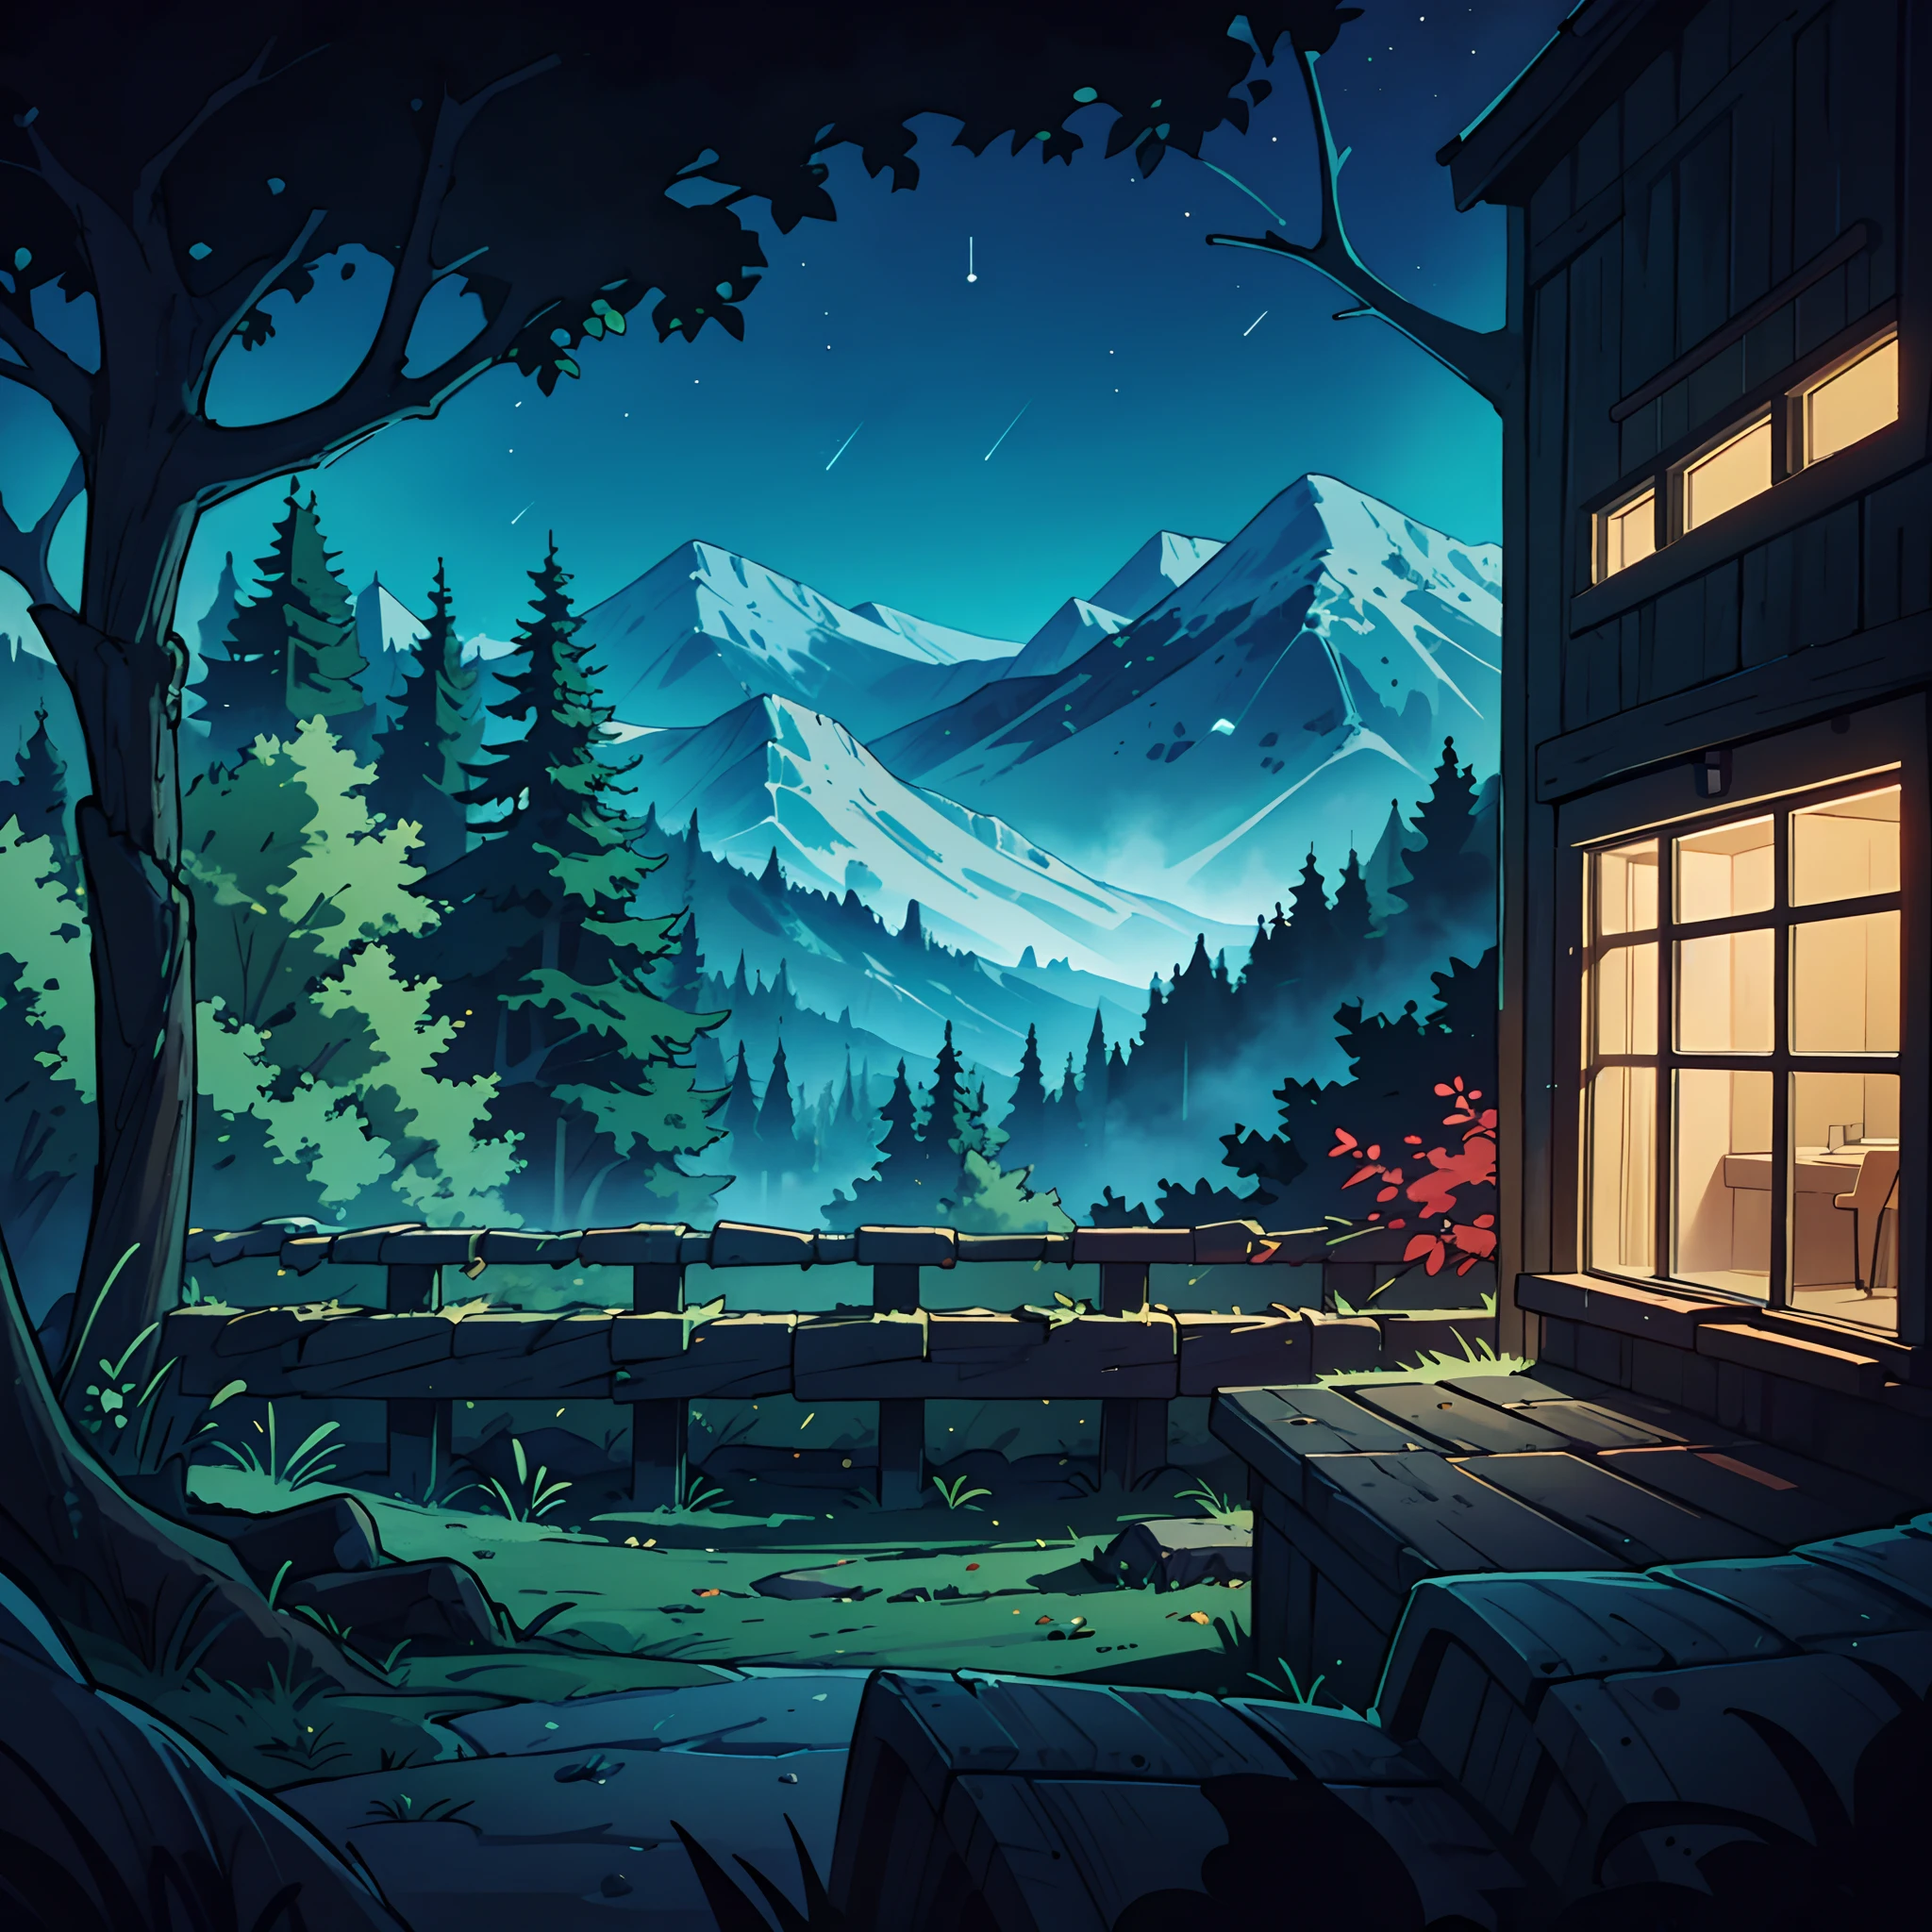 Wide shot of the forest summer night, wilderness with vibrant green trees and a bright, clear night sky, a cozy-looking cabin, The view outside reveals a serene yet eerie ship dock, a stark contrast to the chaos. anime background